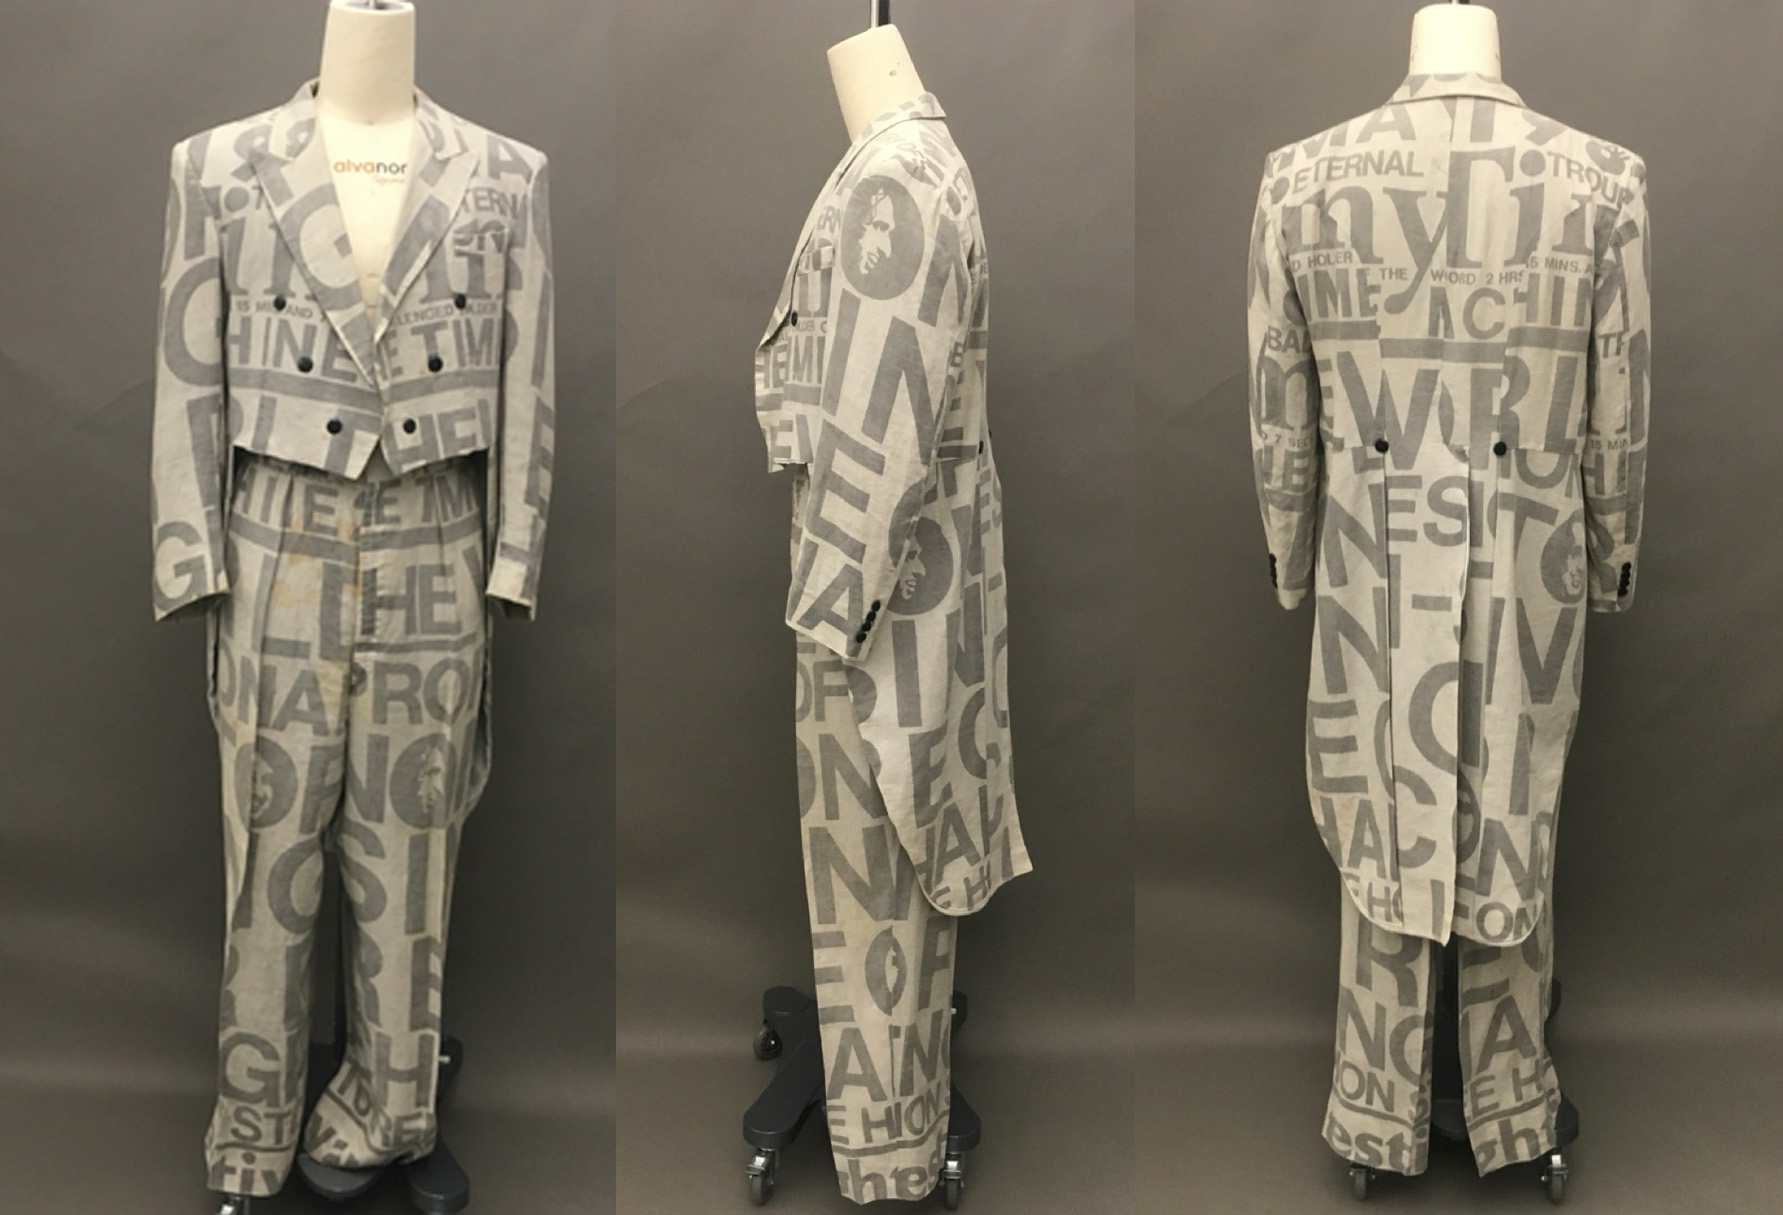 CORNELL COSTUME AND TEXTILE COLLECTION